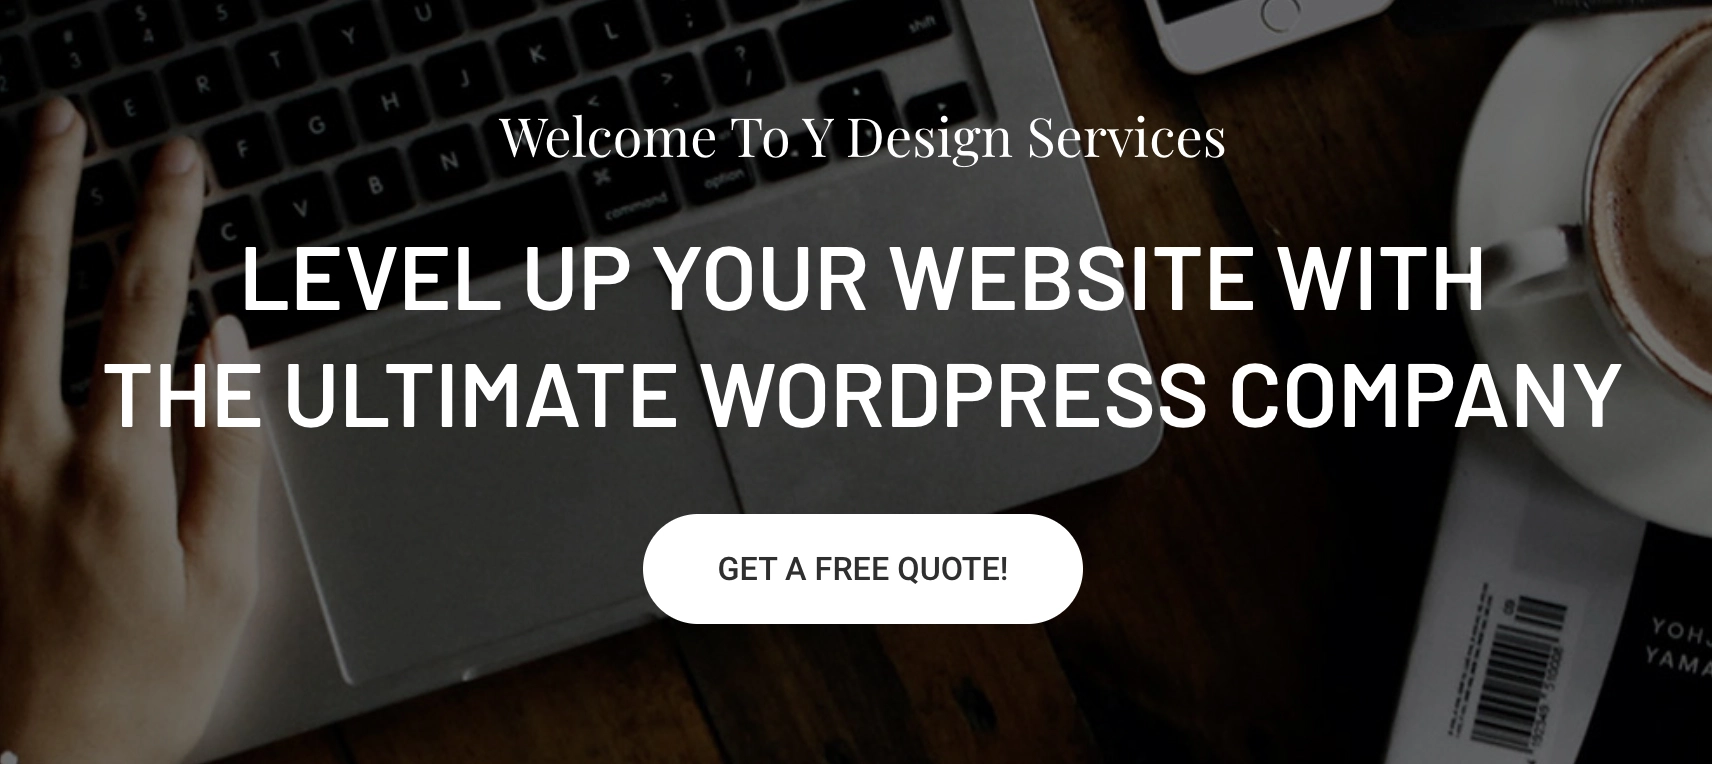 How to select best wordpress development company? Y Design Services